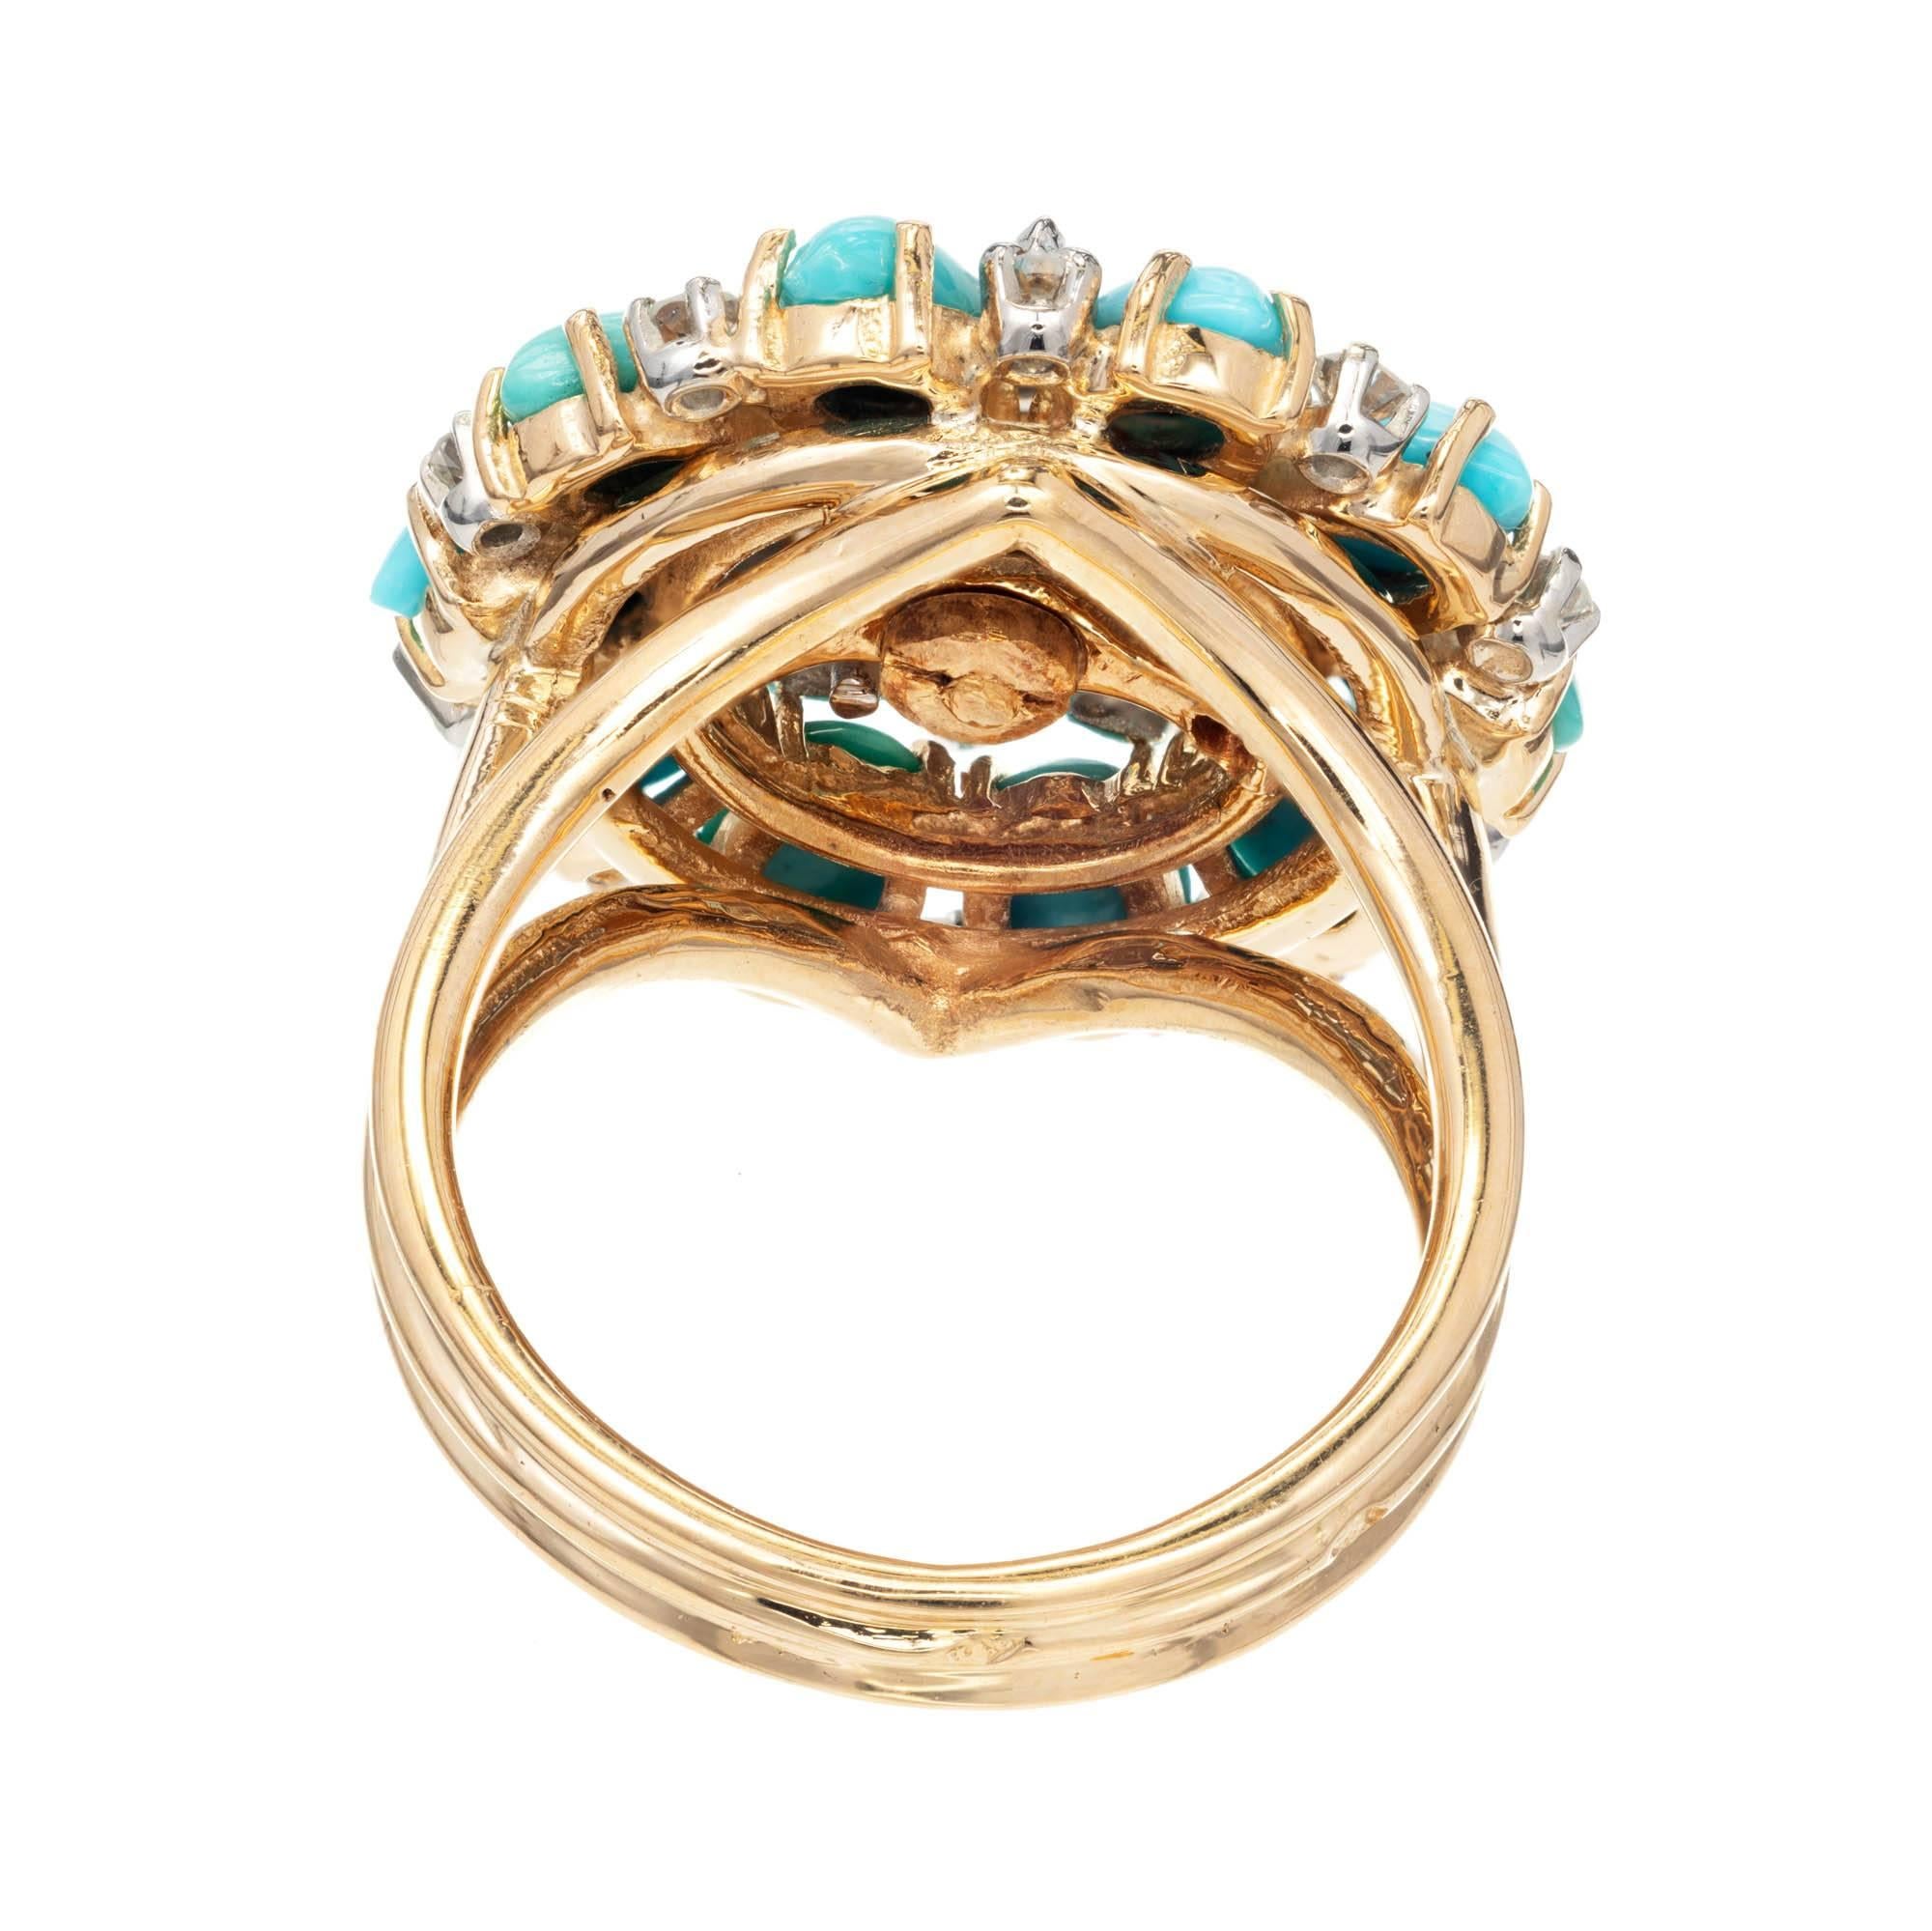 Round Cut GIA Certified 9.81 Carat Persian Turquoise Diamond Gold Cocktail Cluster Ring